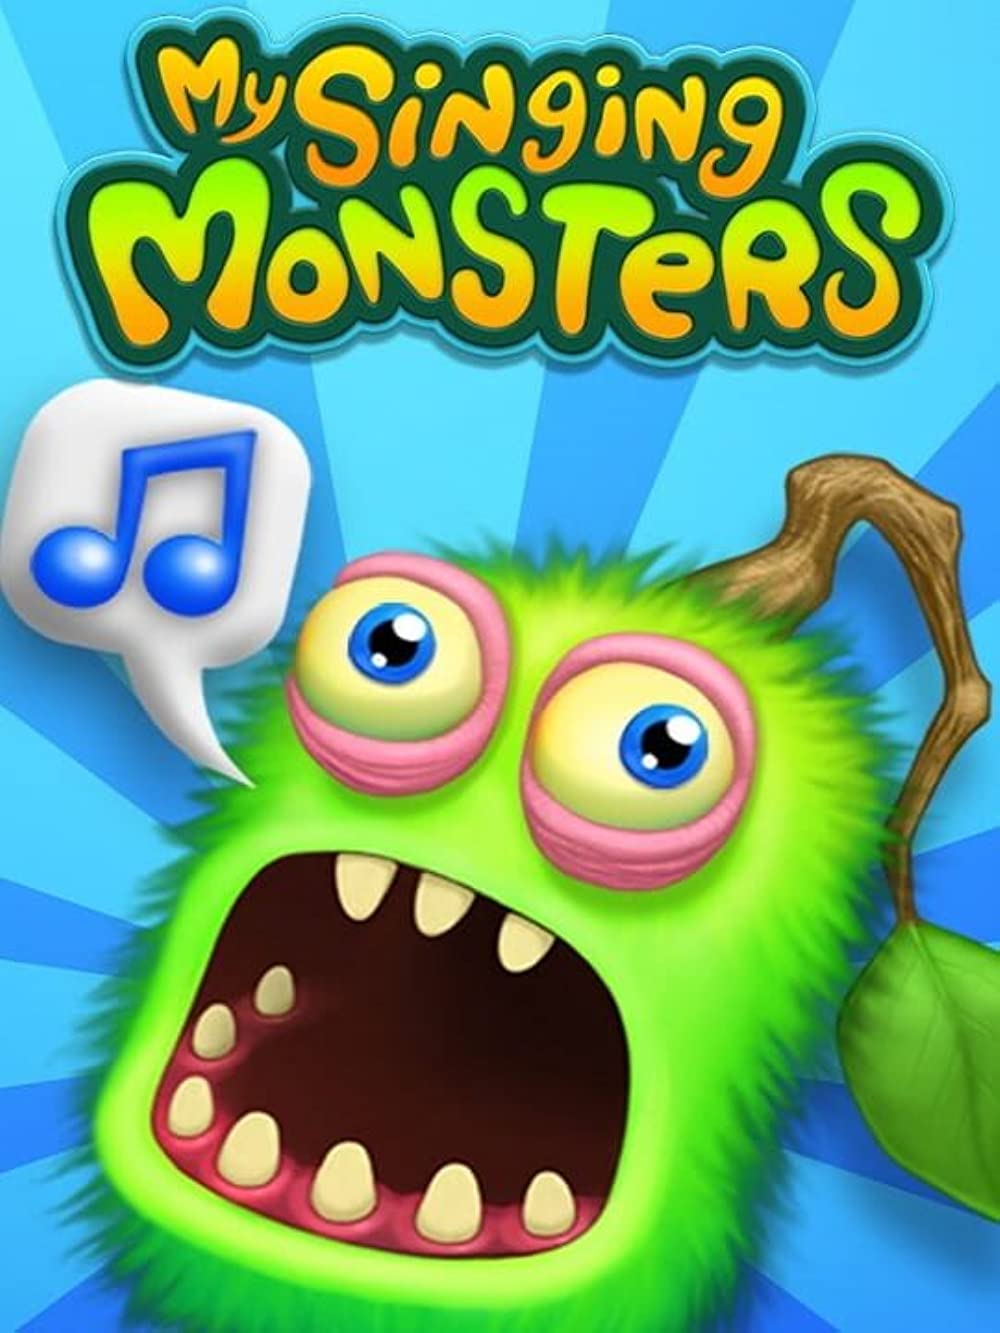 Guess the monster by it's egg! (My Singing Monsters)